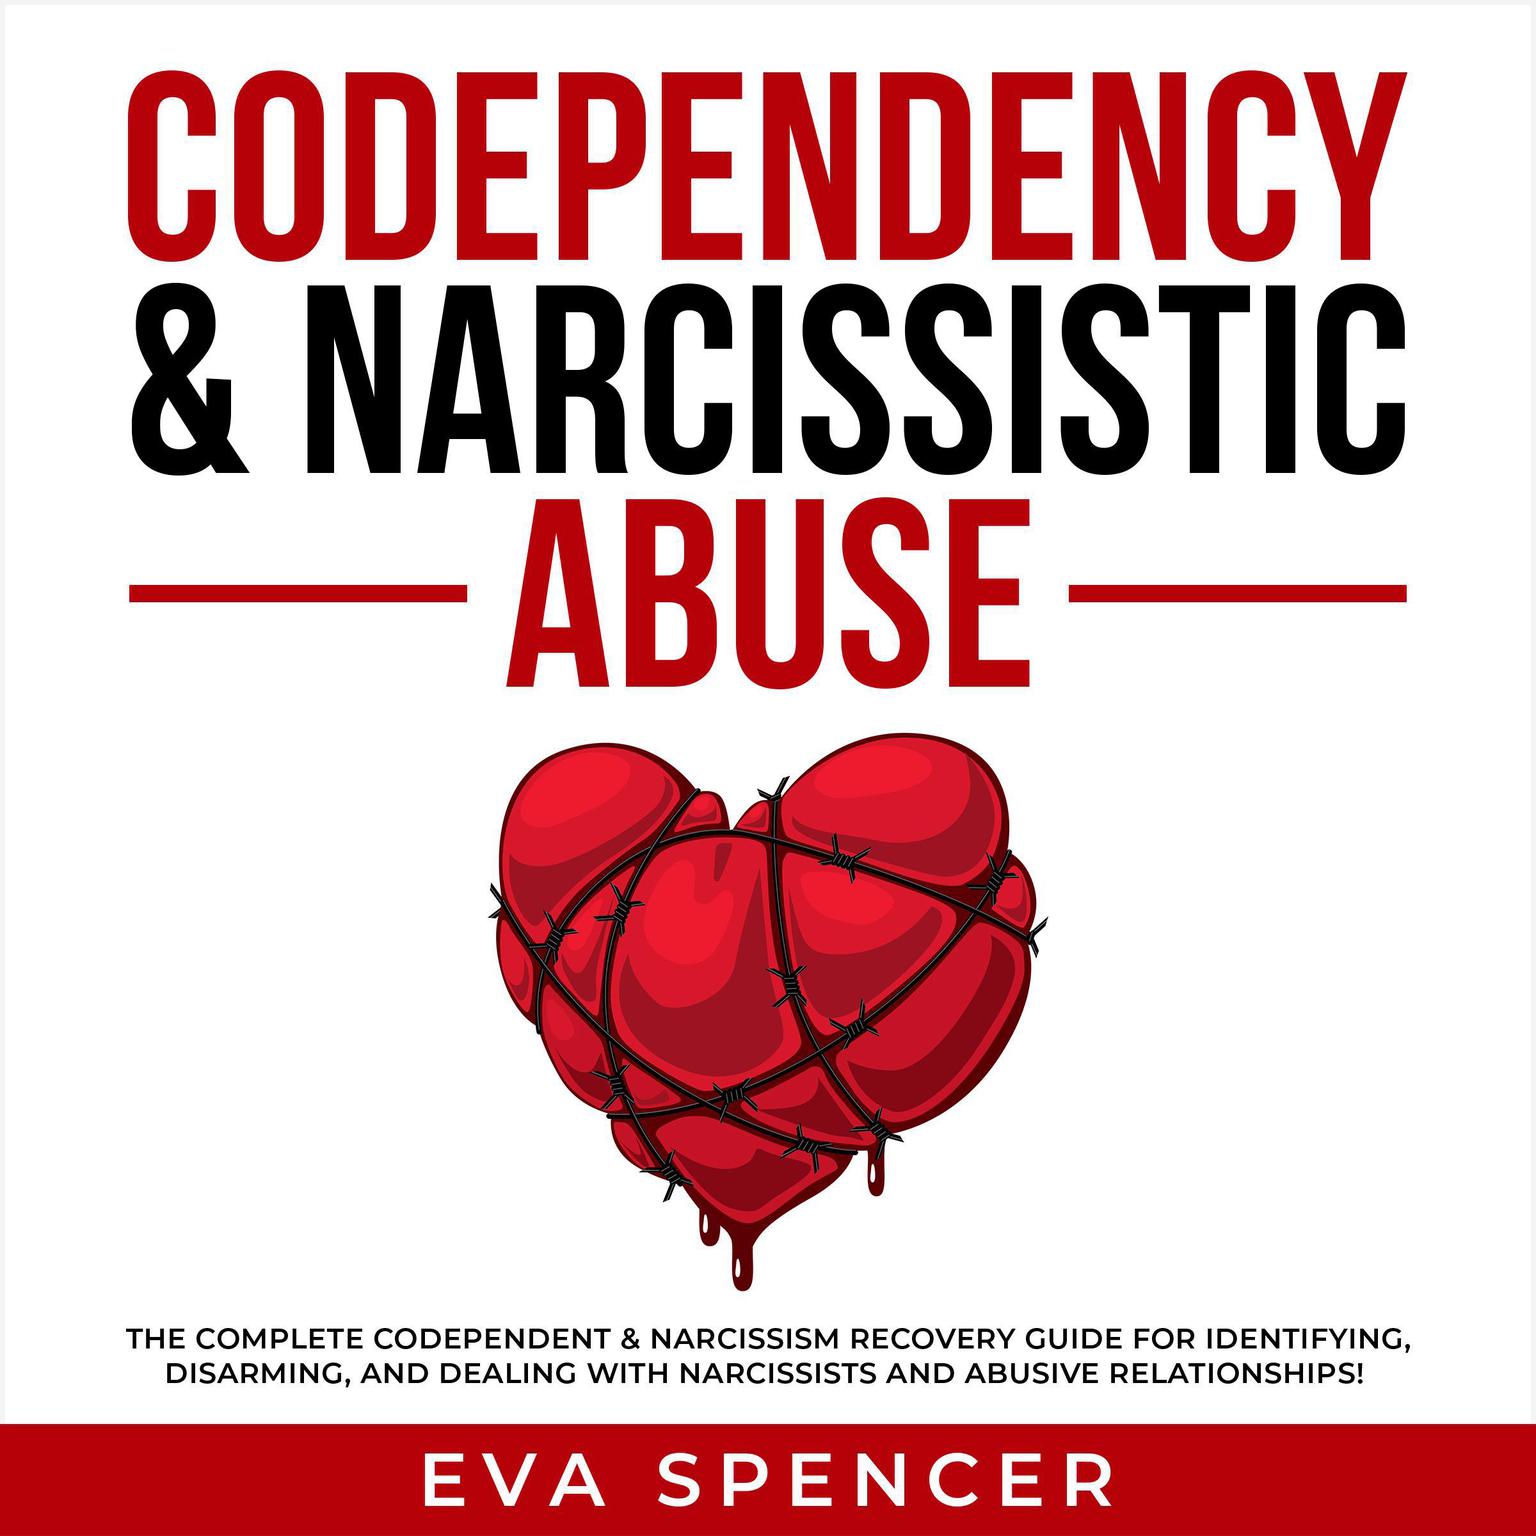 Codependency & Narcissistic Abuse: The Complete Codependent & Narcissism Recovery Guide for Identifying, Disarming, and Dealing With Narcissists and Abusive Relationships! Audiobook, by Eva Spencer